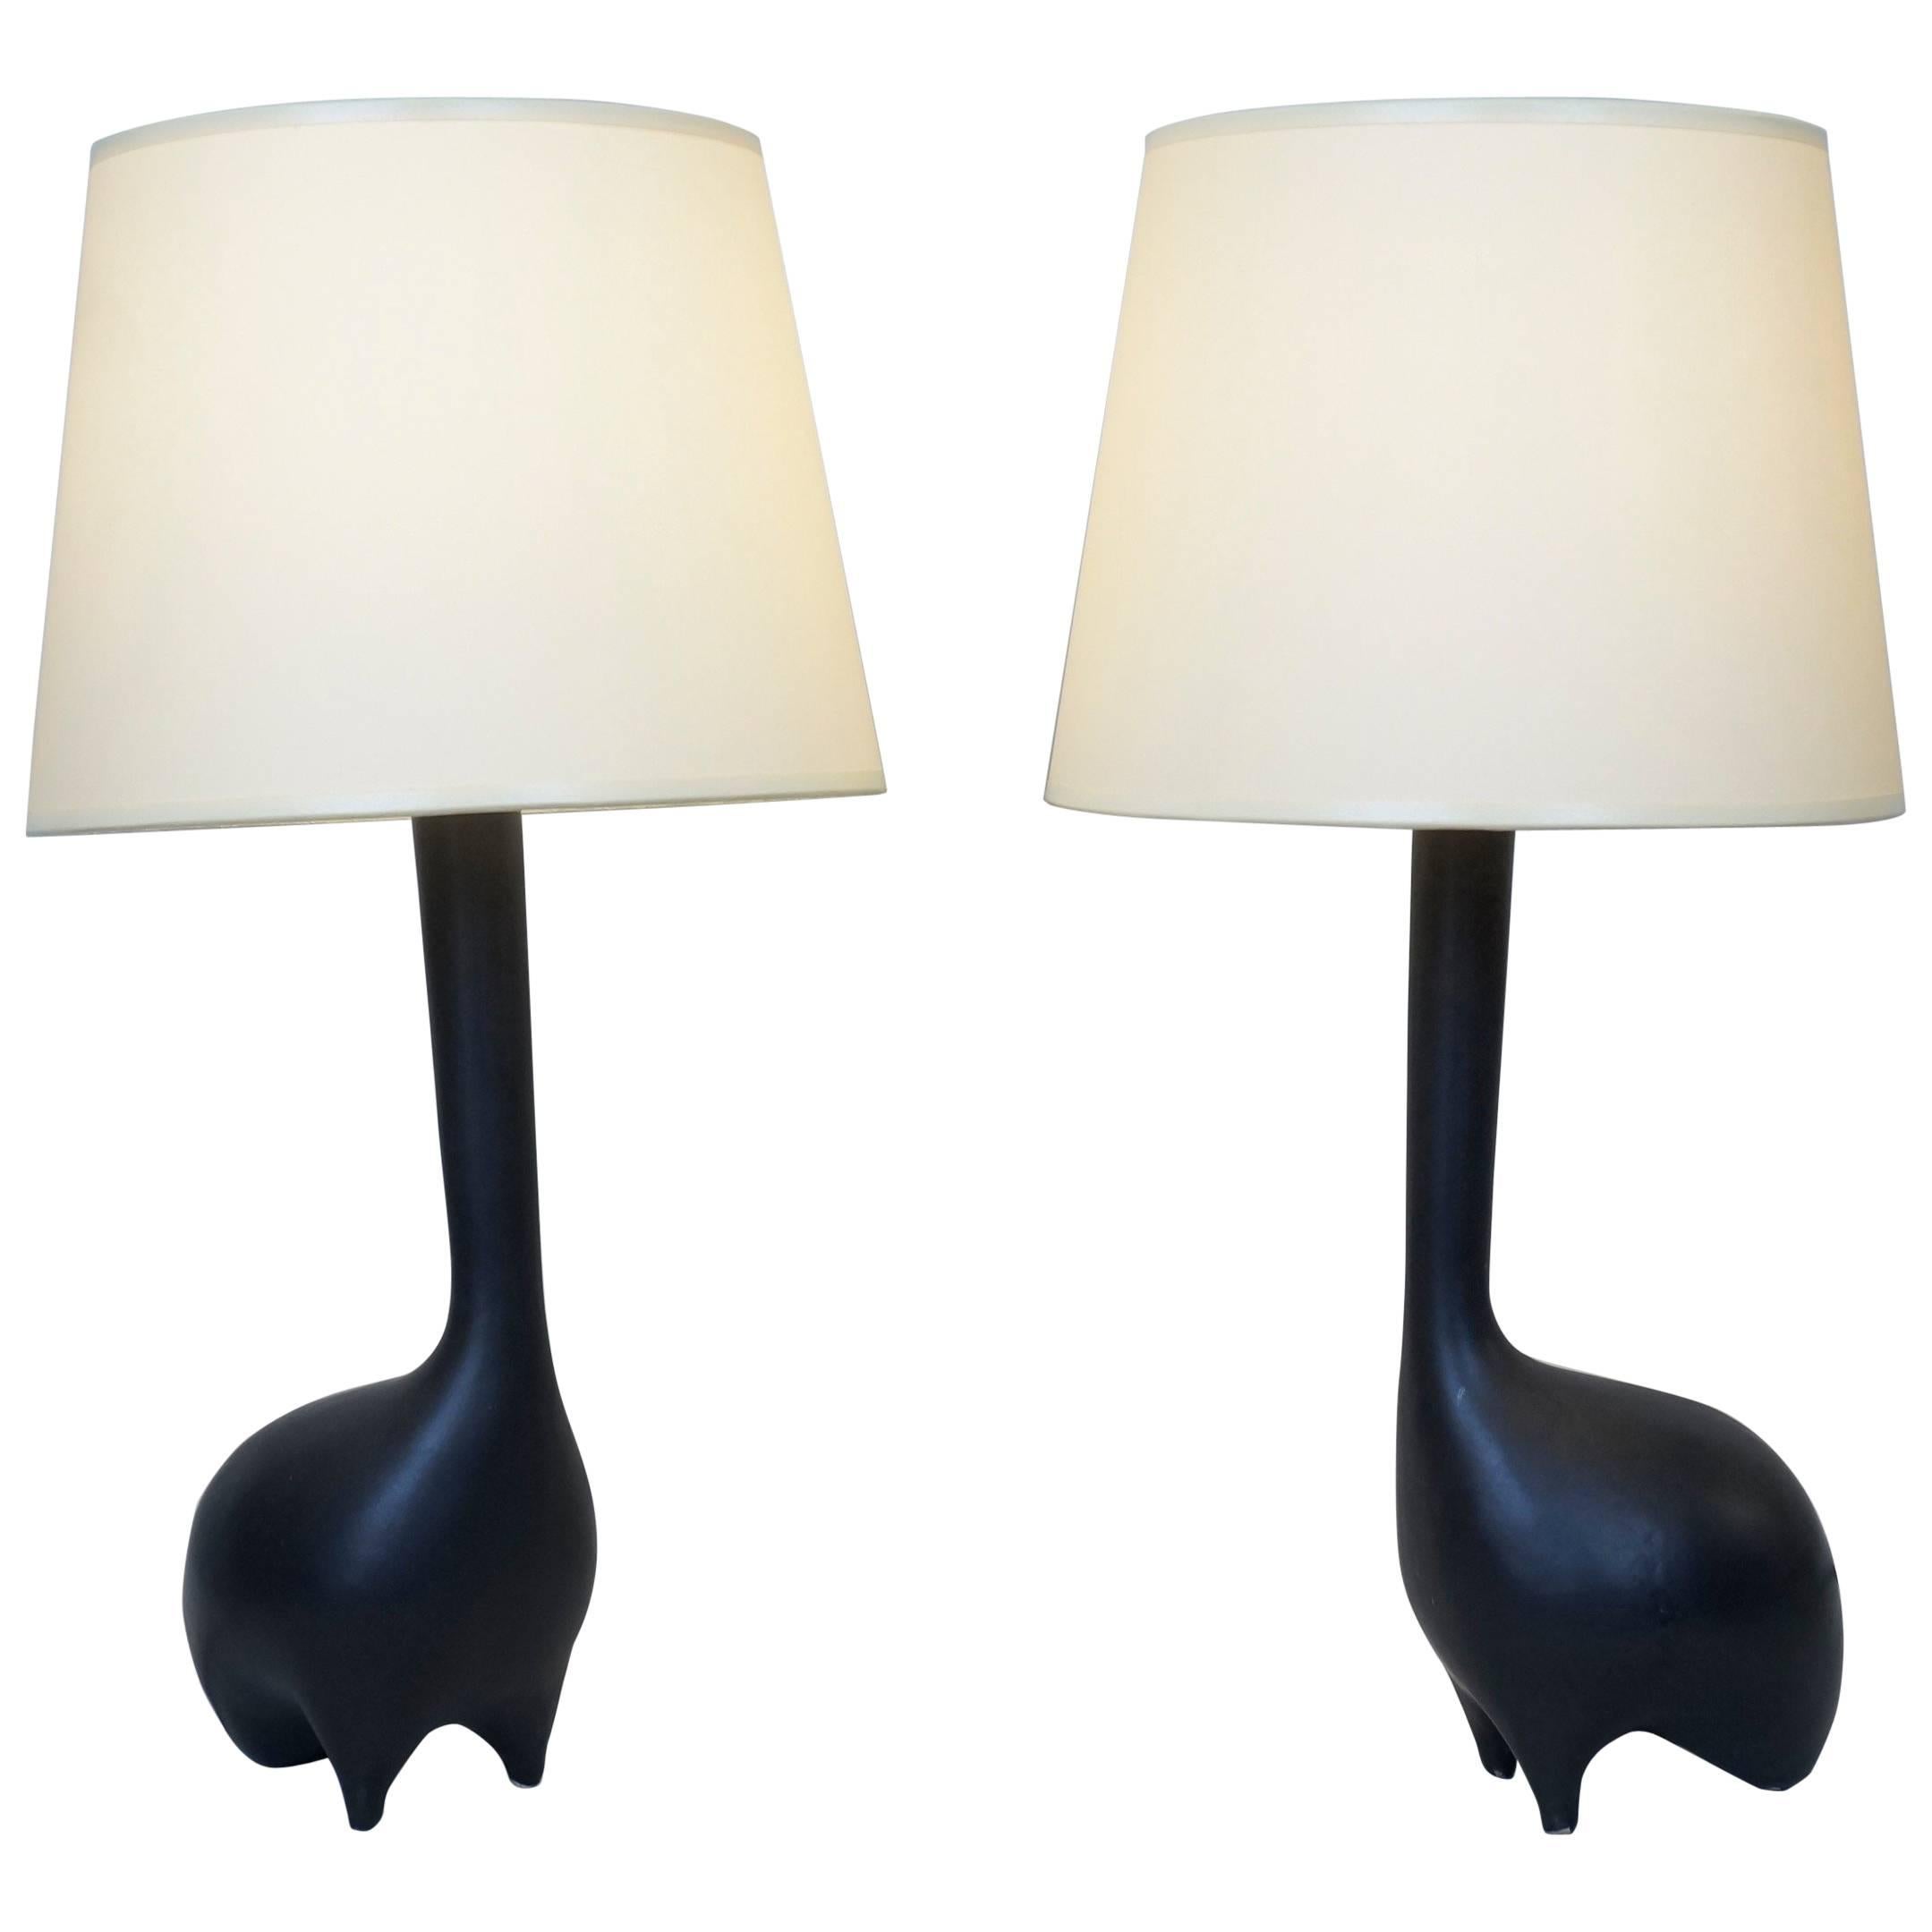 Mid-20th Century Pair of Zoomorphic Black Satin Ceramic Table Lamps For Sale